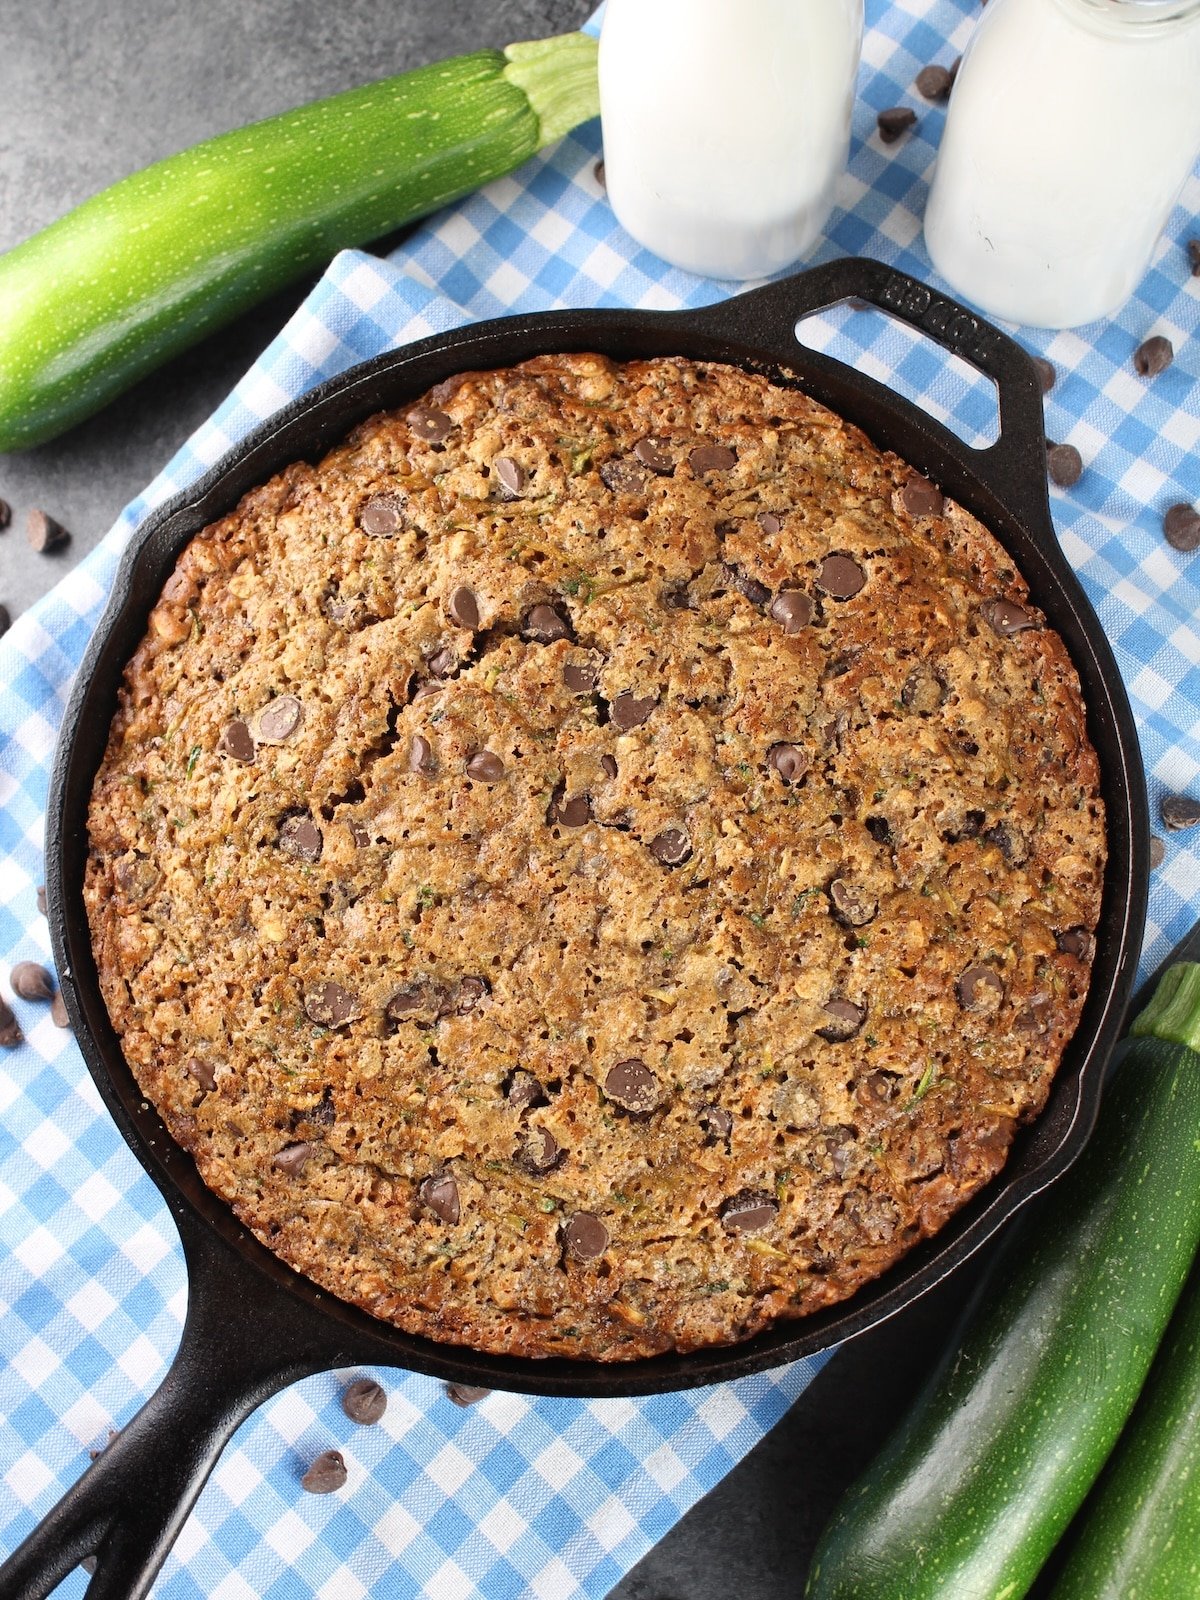 Chocolate Chip Zucchini Skillet Cake baked in a cast iron skillet.